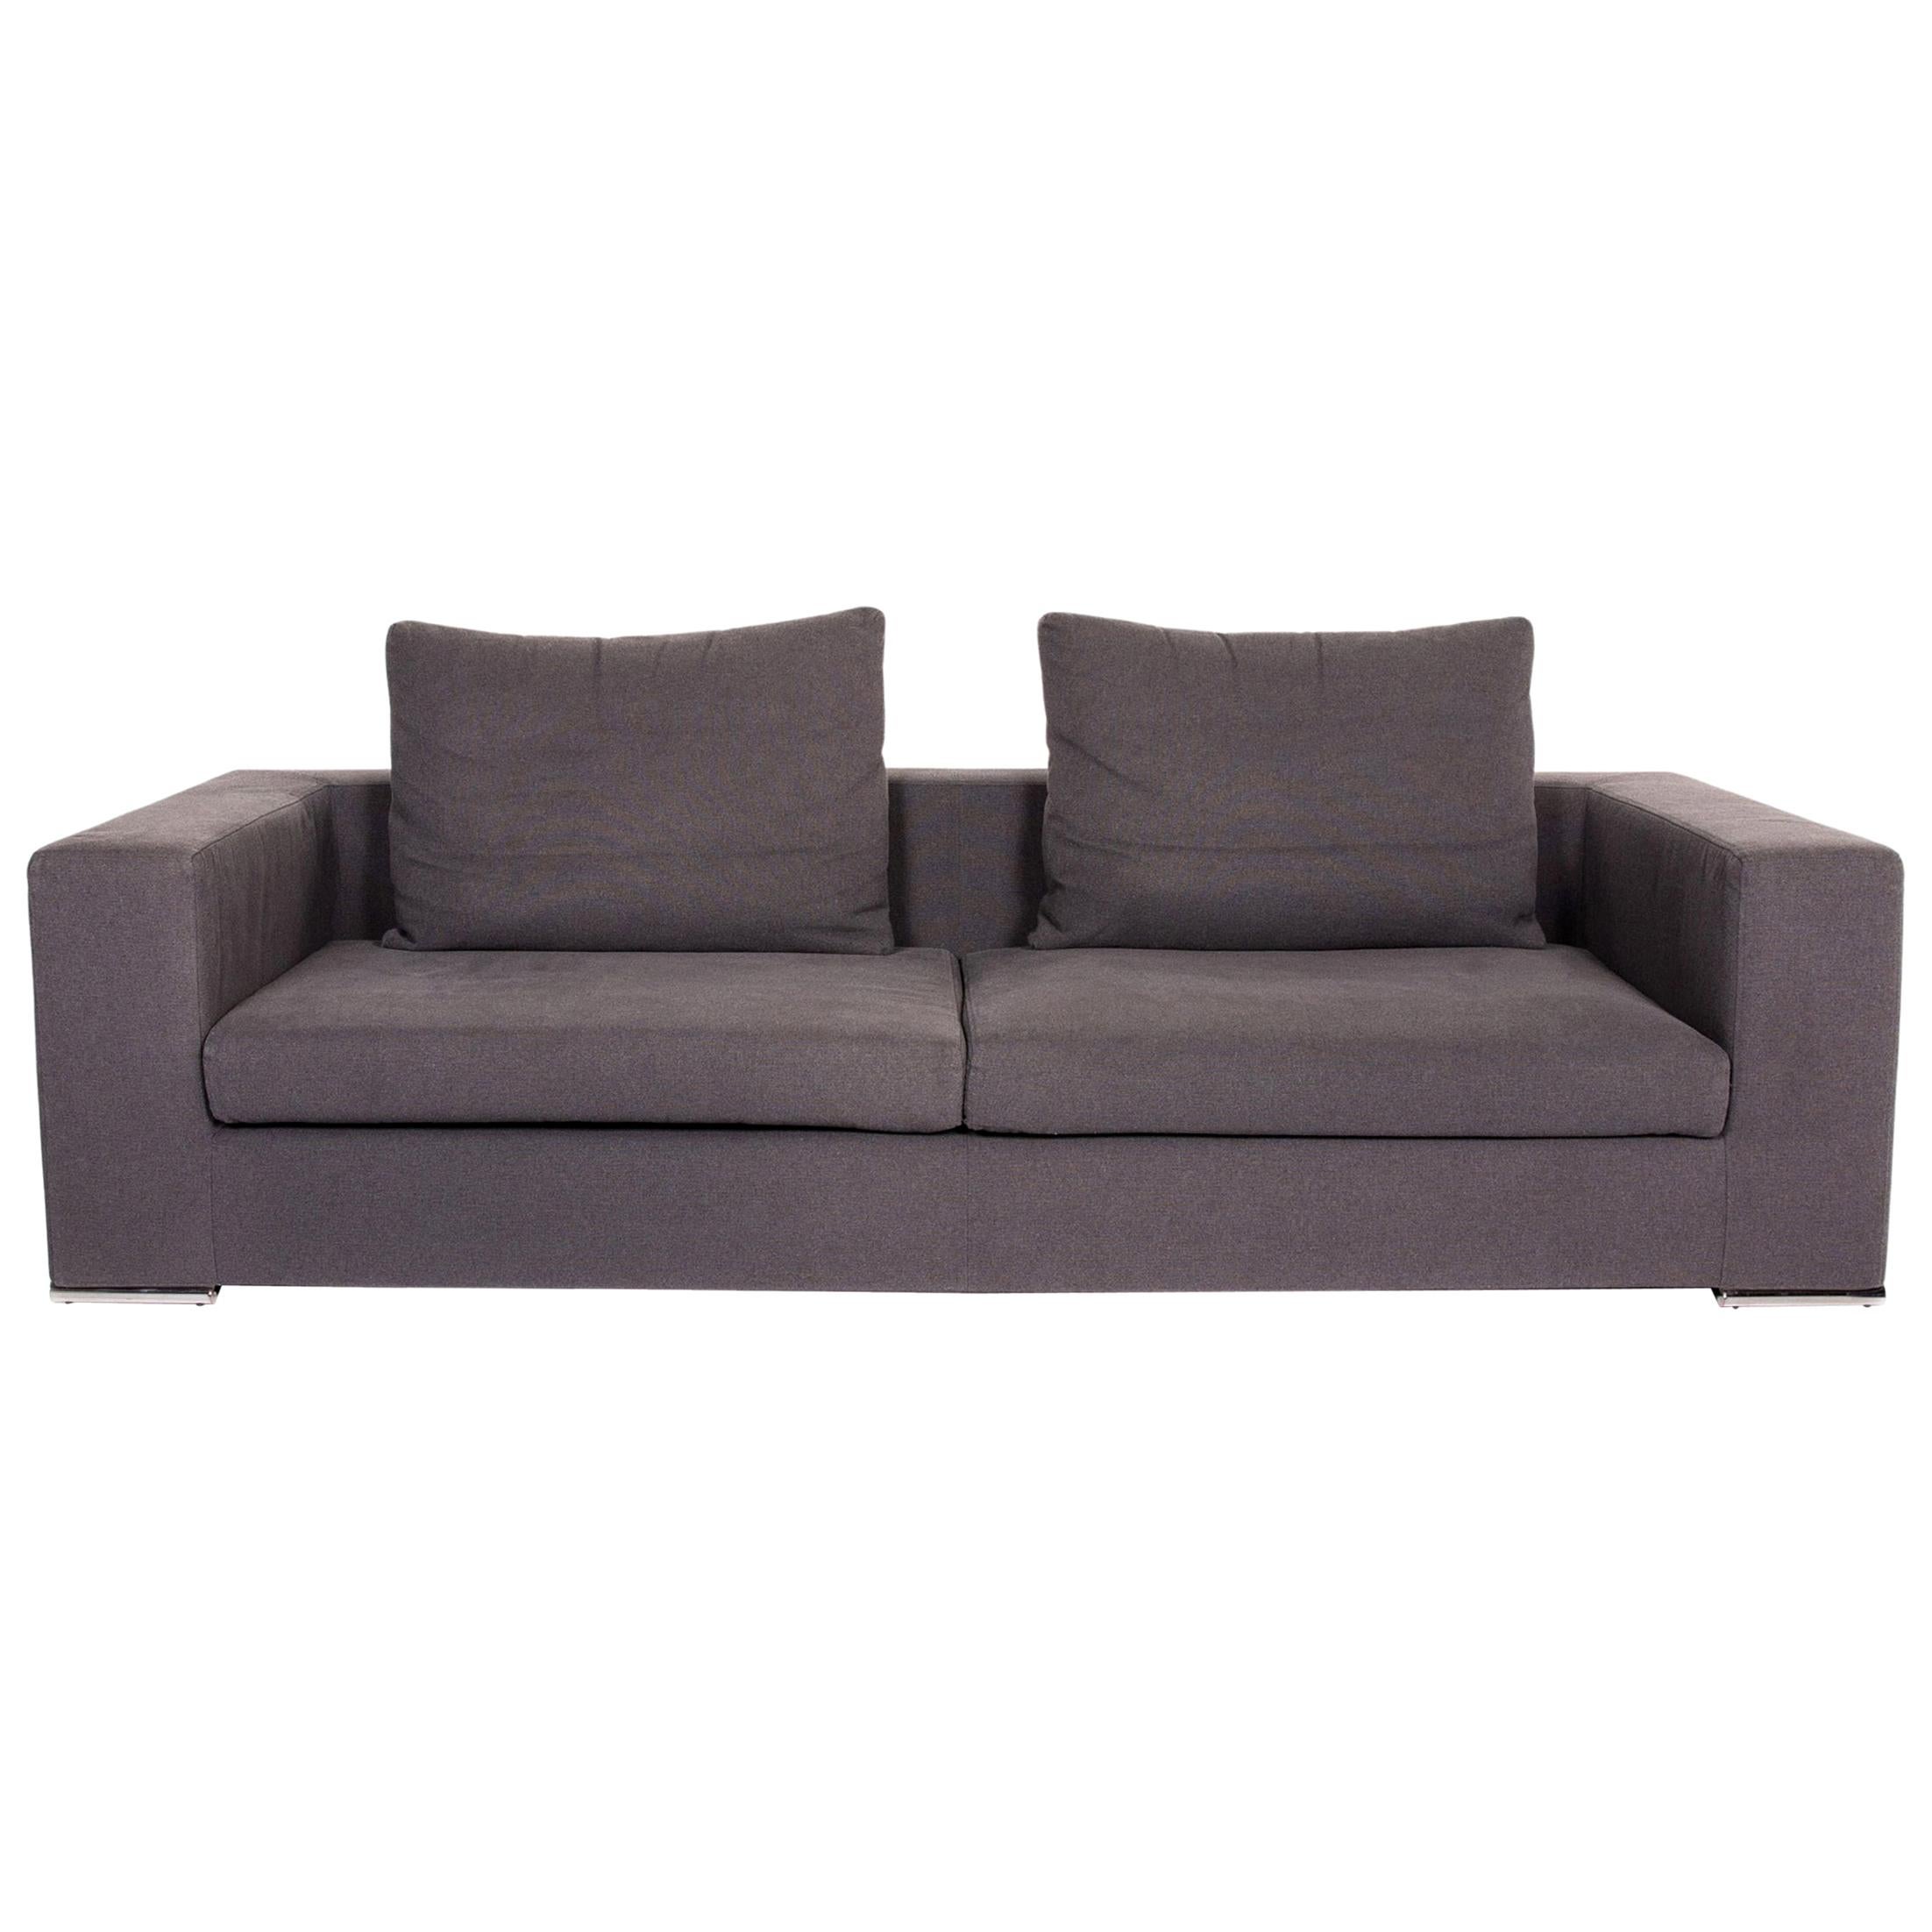 Saba Italia Fabric Sofa Gray Two-Seat Couch For Sale